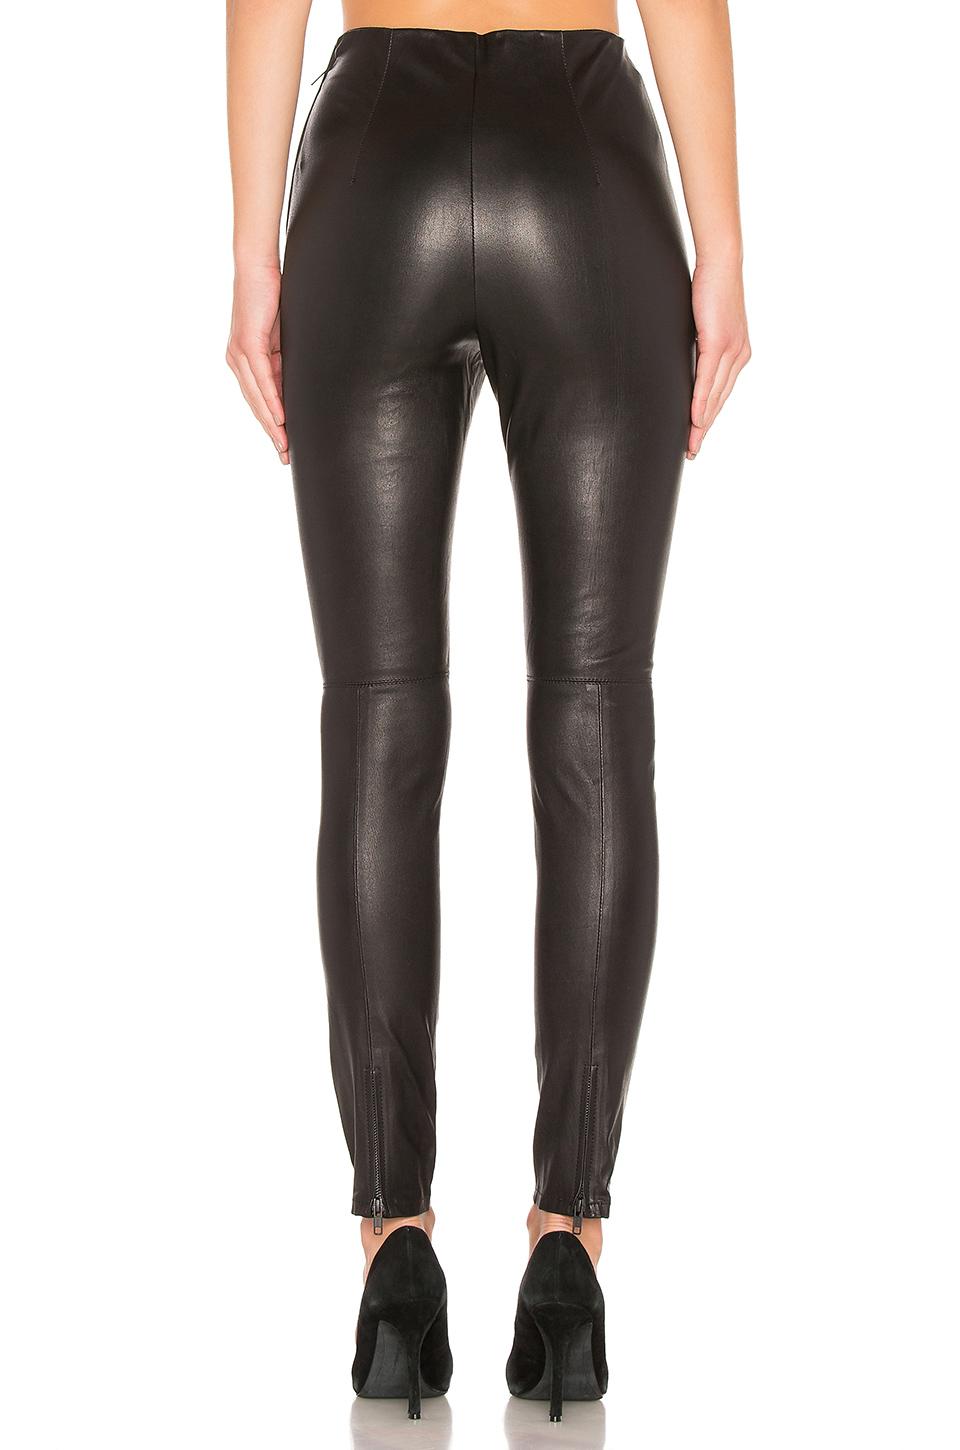 L'academie Angelica Leather Pants in Black - Lyst